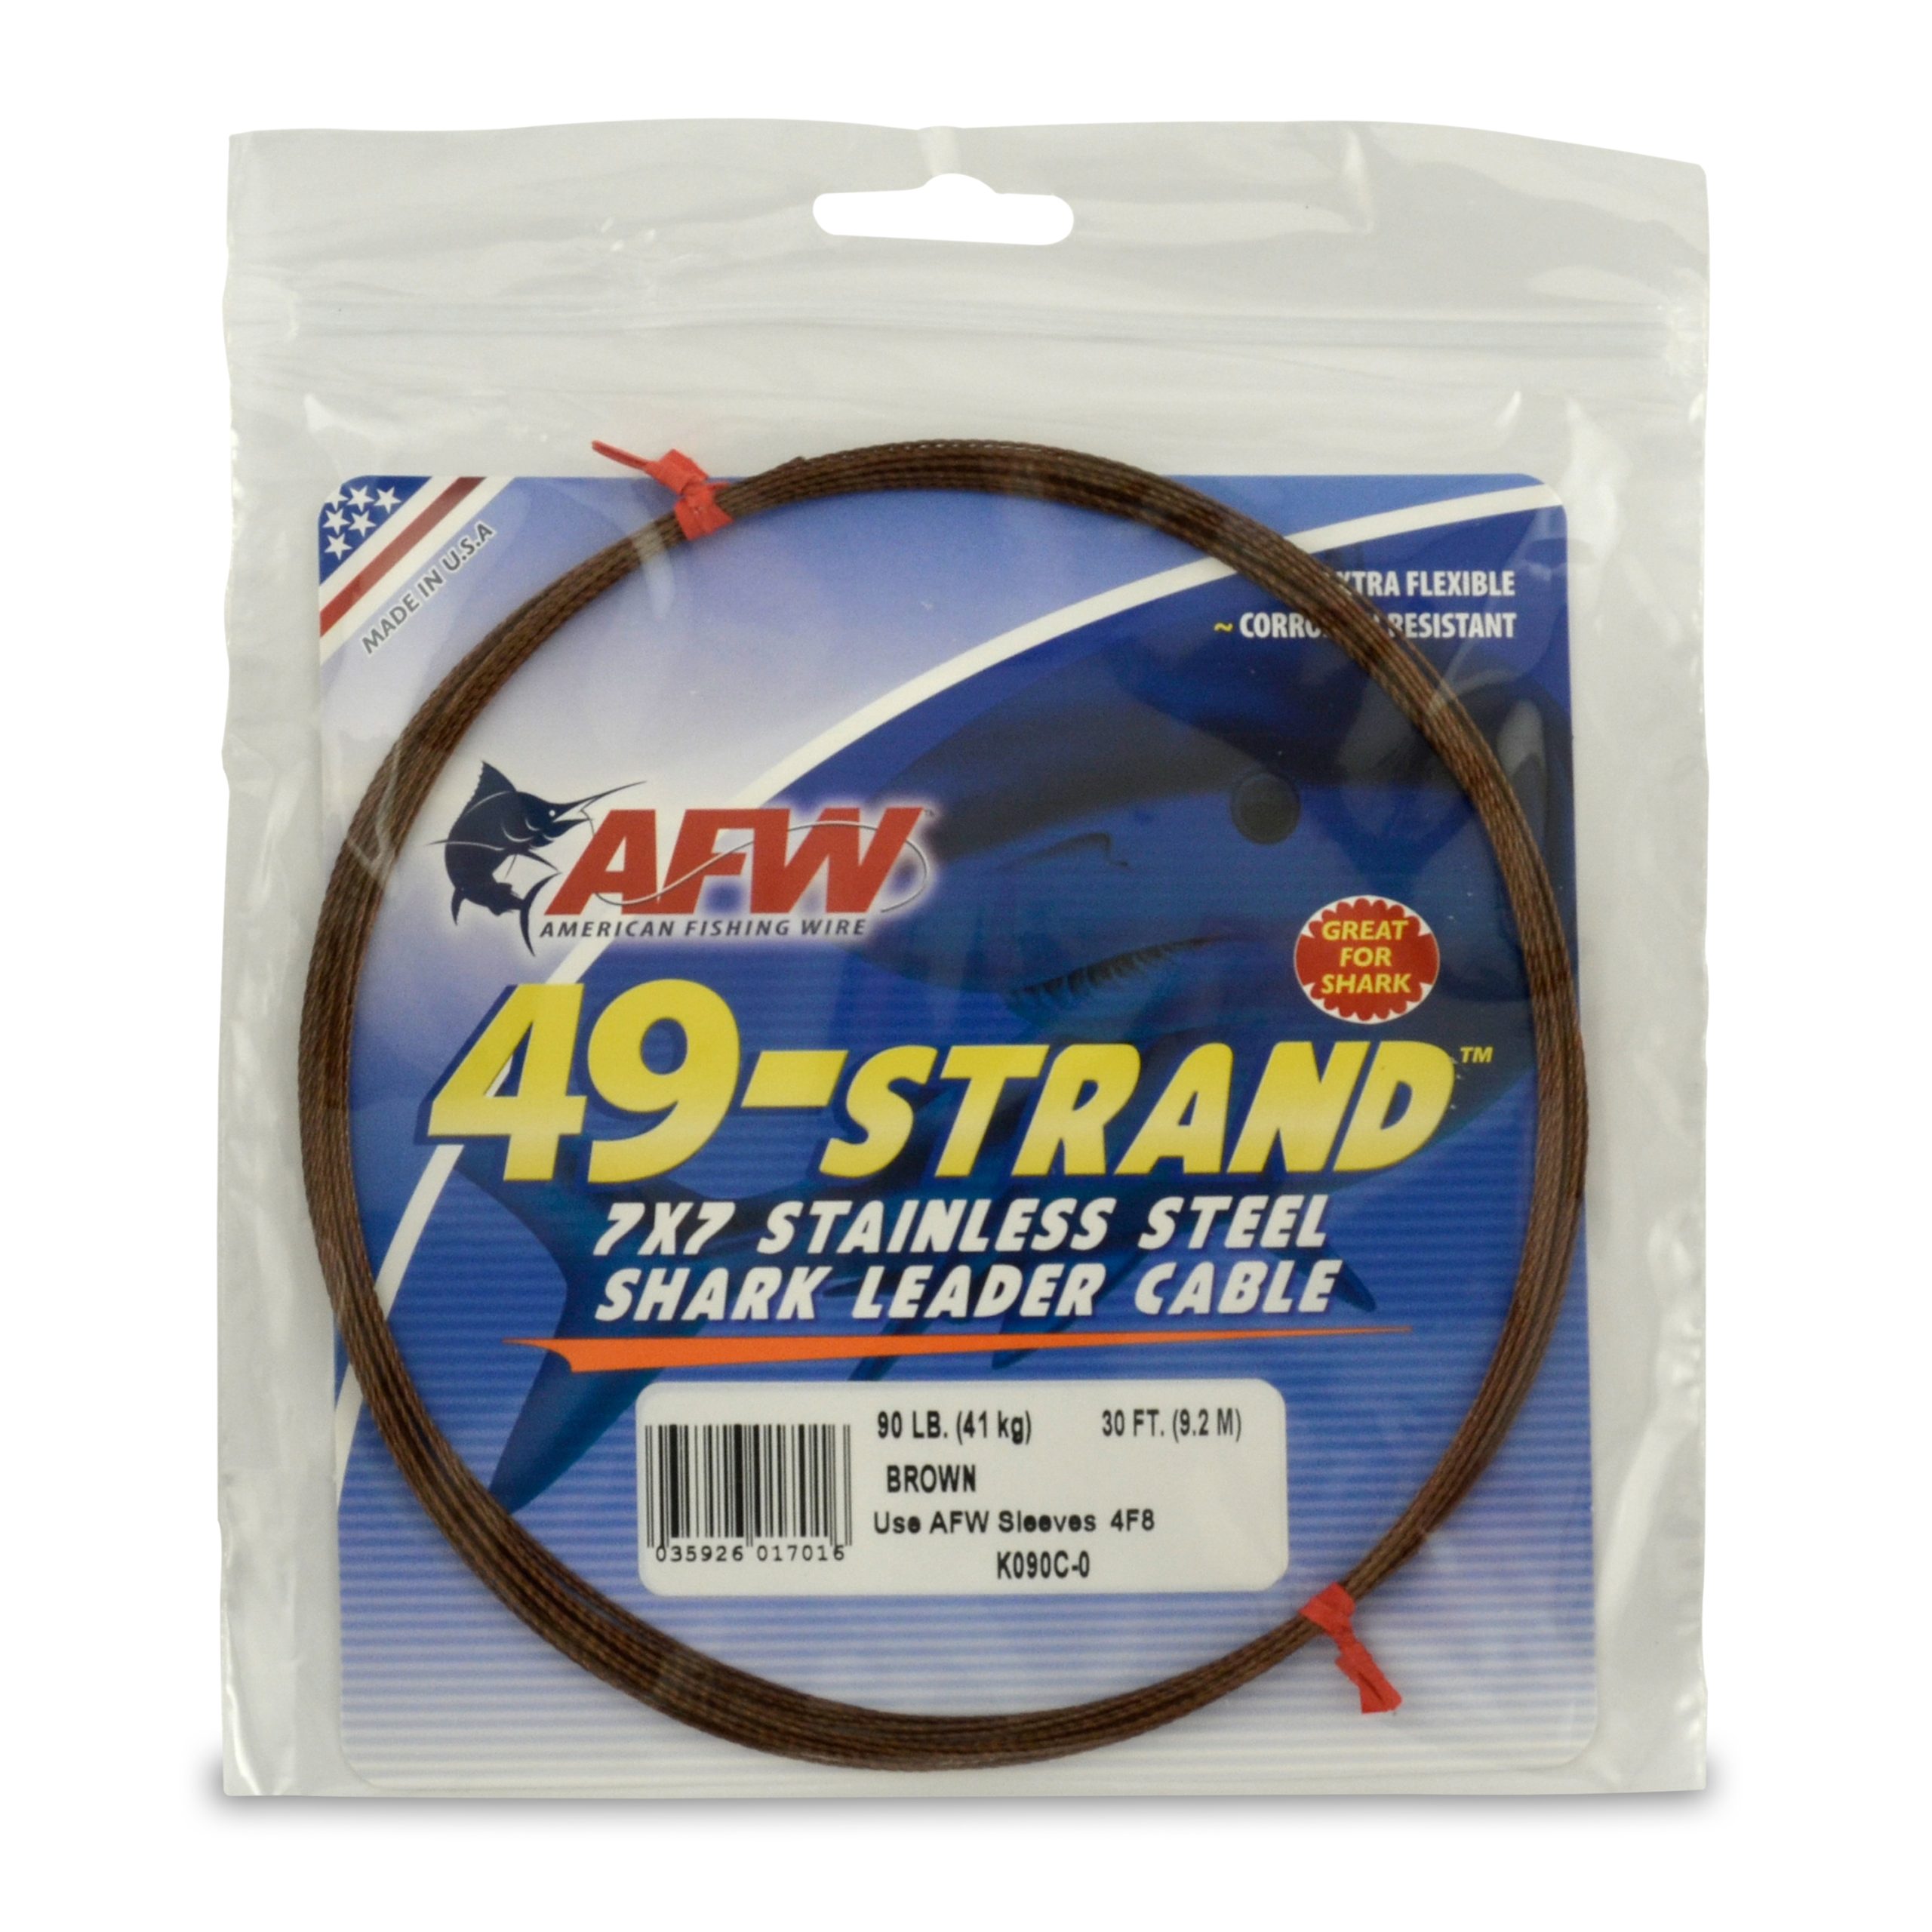 AFW 49 Strand, 7x7 Stainless Steel Shark Leader Cable